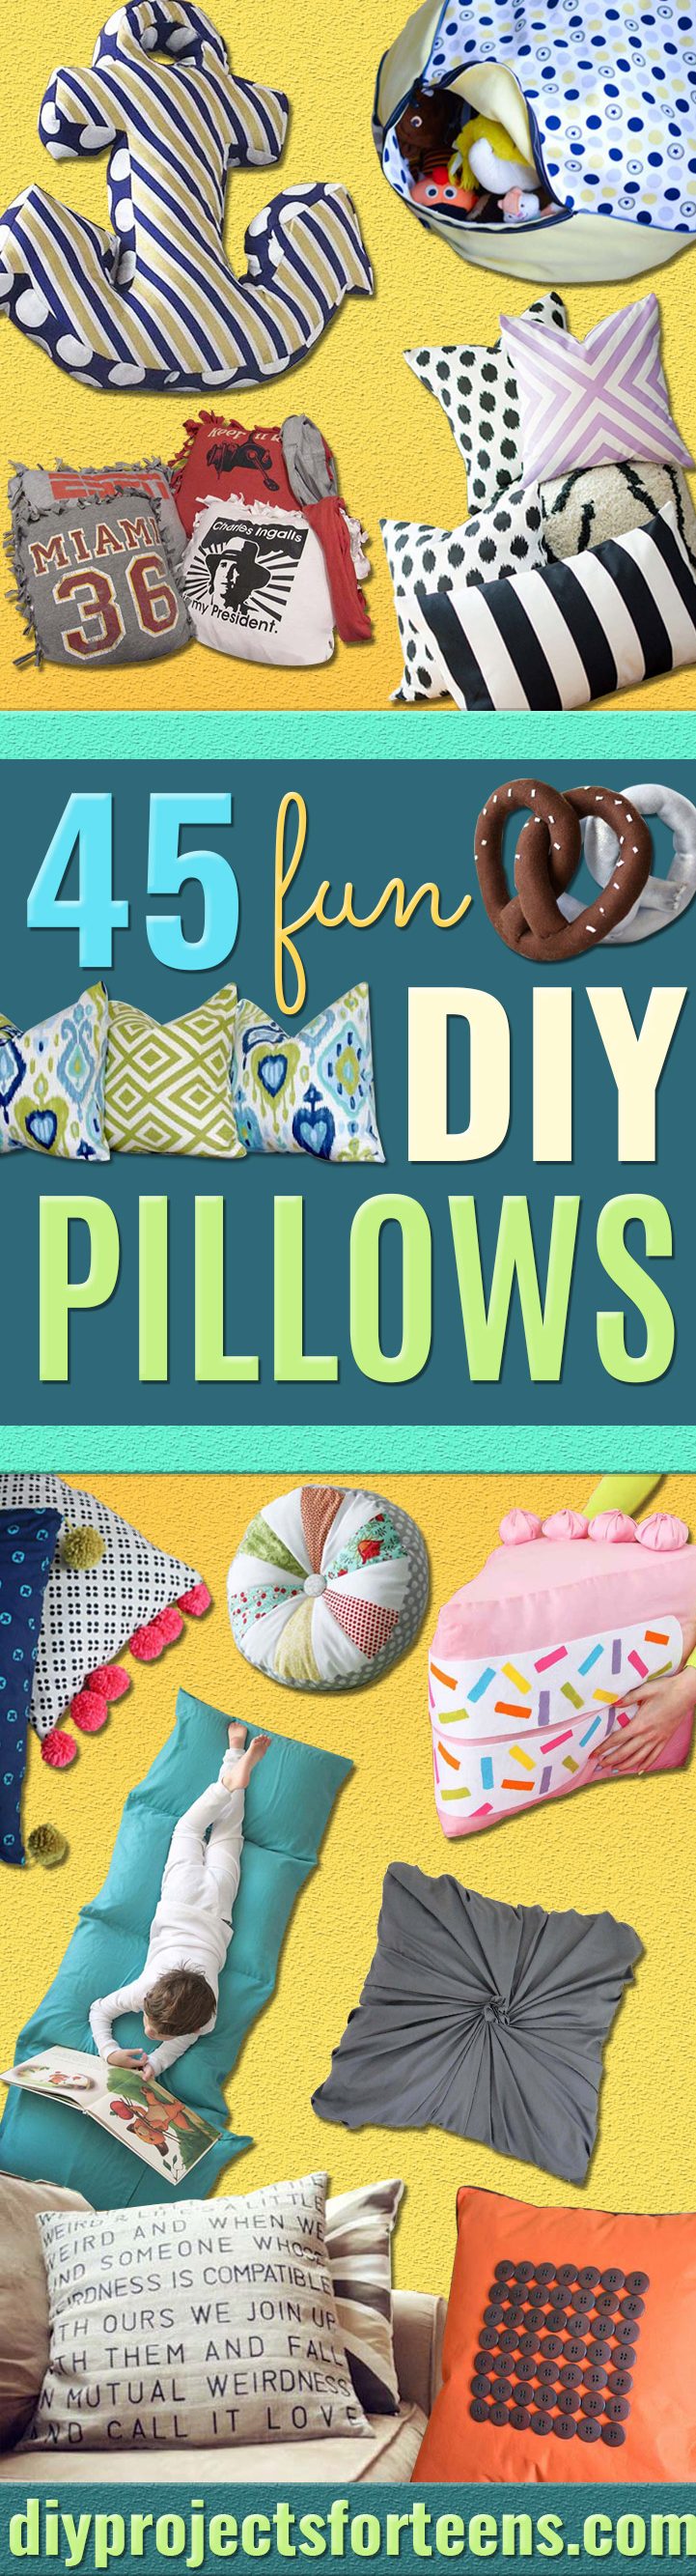 DIY Pillows and Fun Pillow Projects - Creative, Decorative Cases and Covers, Throw Pillows, Cute and Easy Tutorials for Making Crafty Home Decor - Sewing Tutorials and No Sew Ideas for Room and Bedroom Decor for Teens, Teenagers and Adults